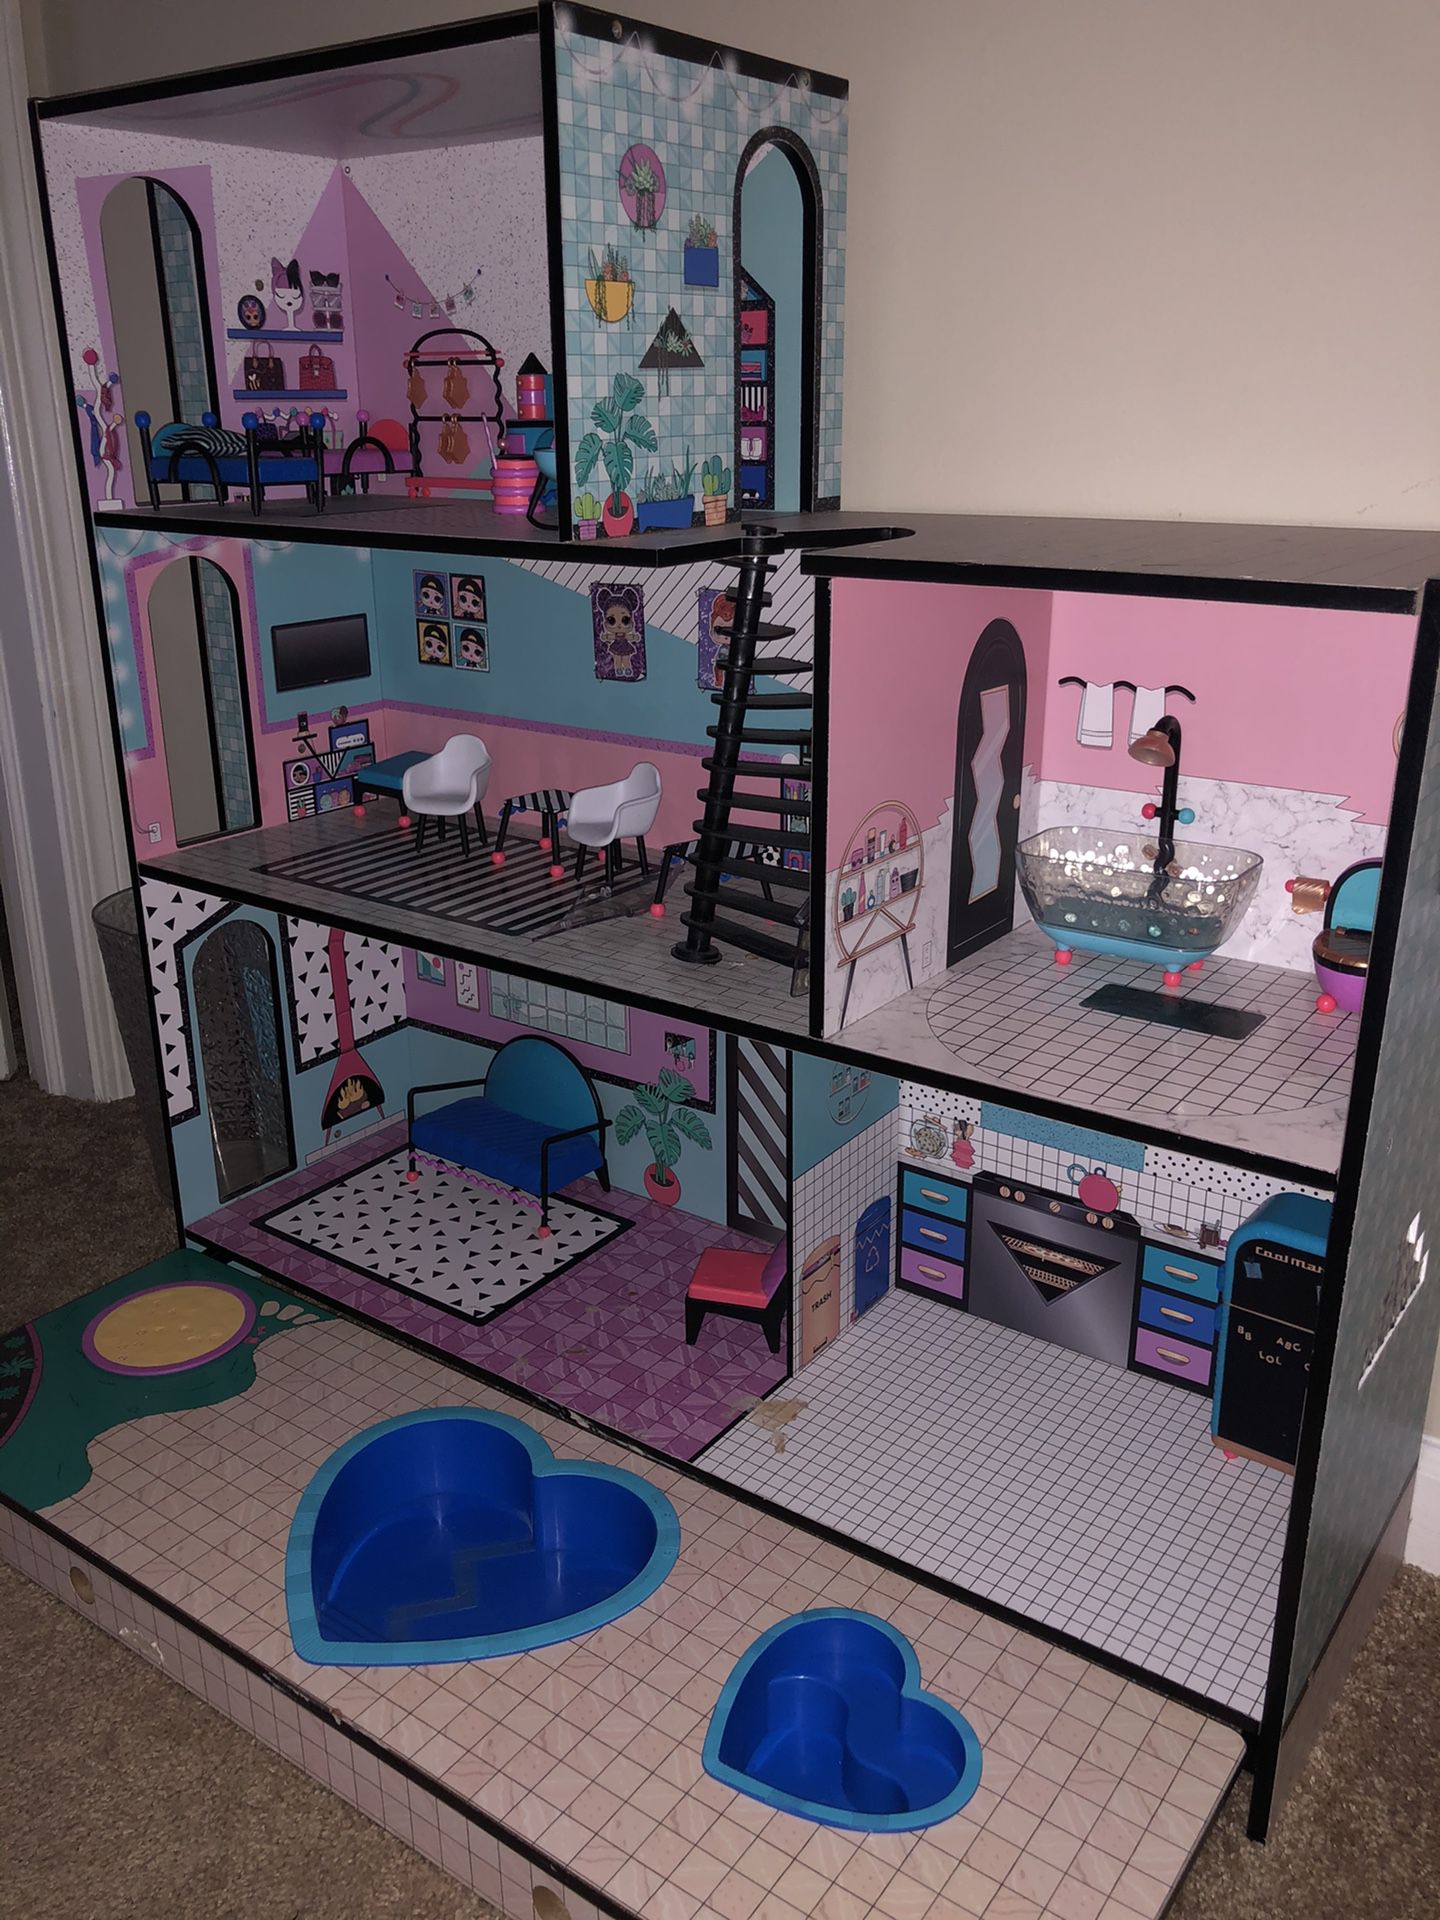 LOL doll house with furniture